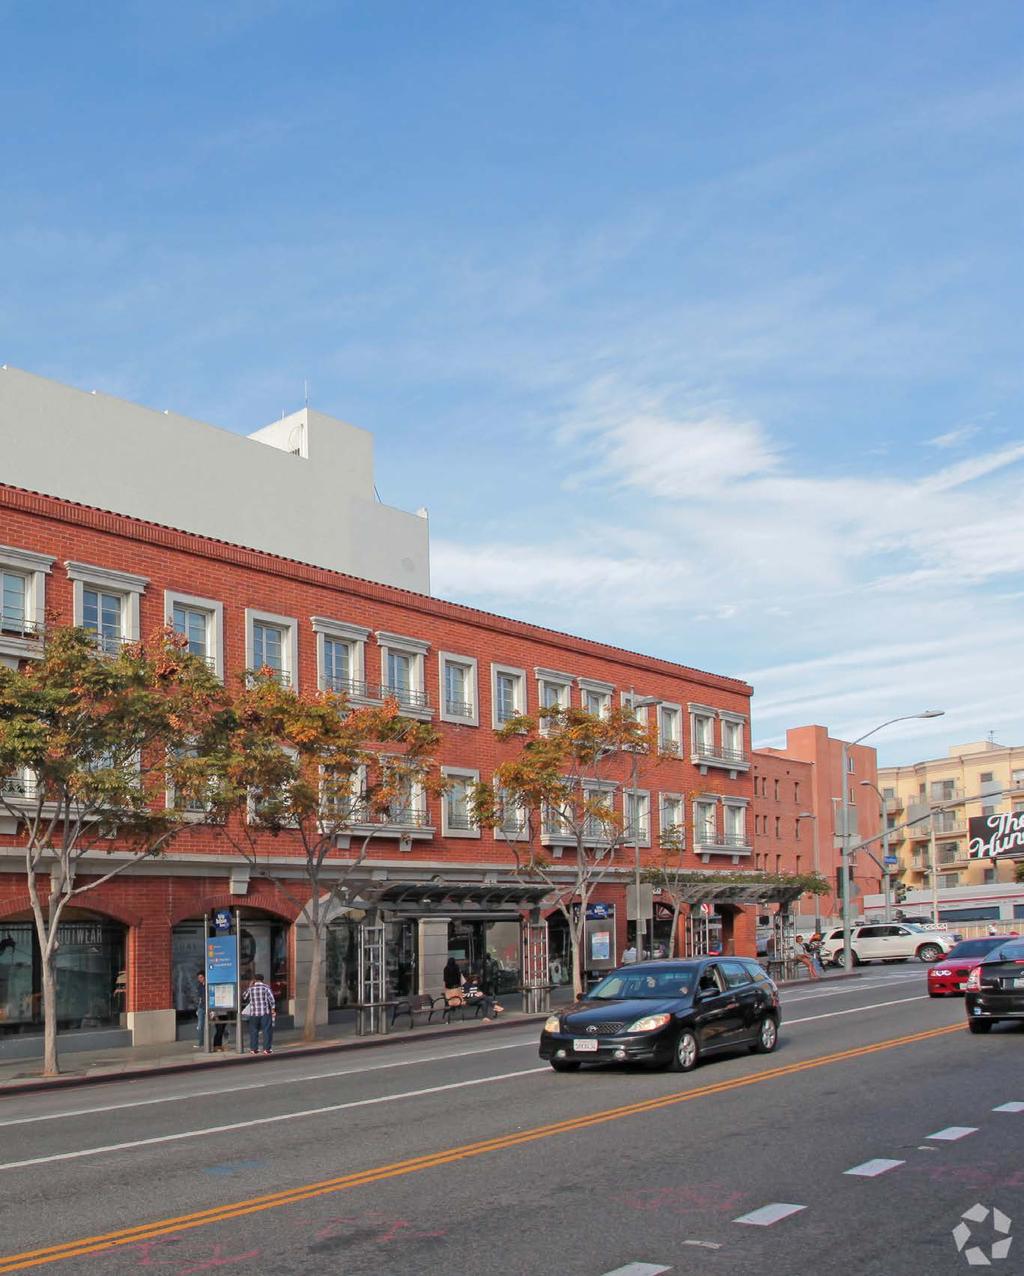 1460 4TH STREET SANTA MONICA, CA 90401 SPACES RENT AVAILABILITY TERM PARKING FEATURES CONTACT Suite 210 - ± 2,127 SF Suite 212 - ± 936 SF Suite 304 - ± 1,331 SF Suite 308 - ± 1,300 SF Suite 210 & 212